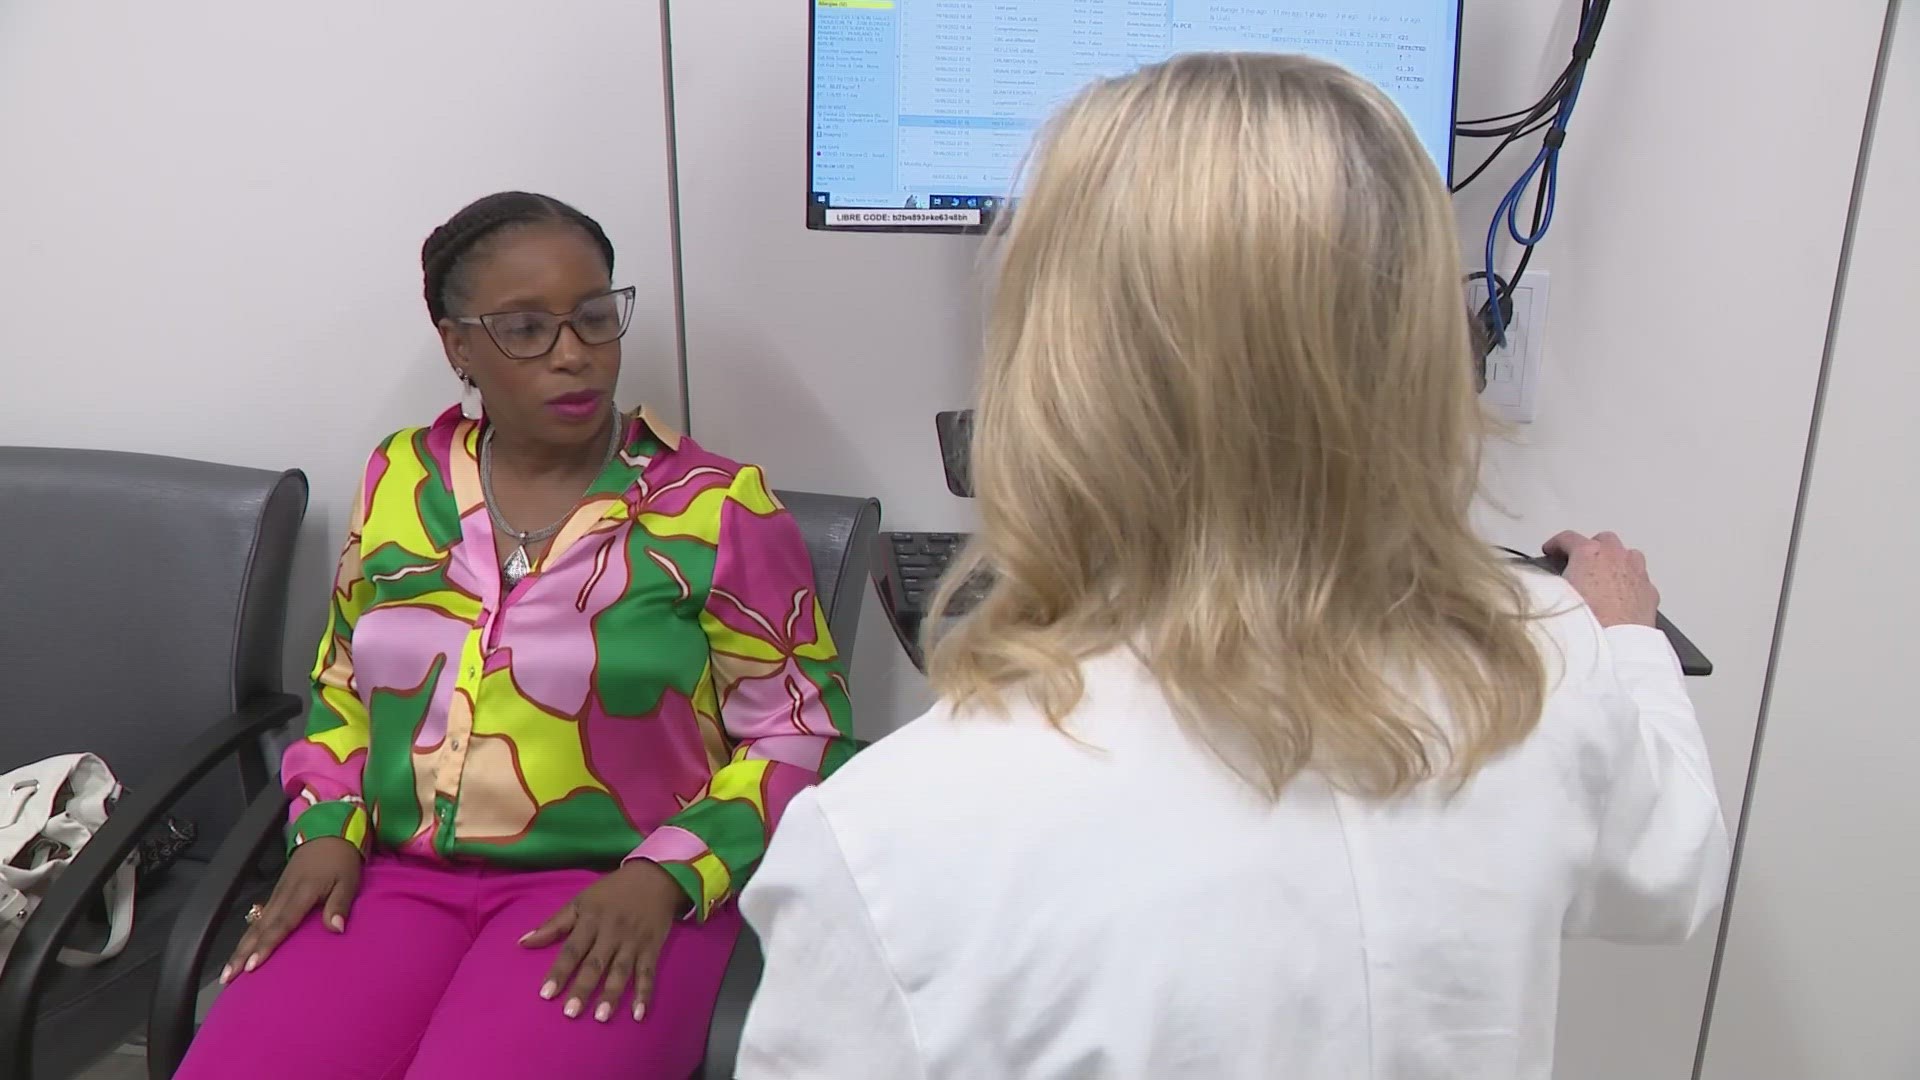 Doctors say there are more men living with HIV than women, but in the South, more women of color are testing positive for HIV.